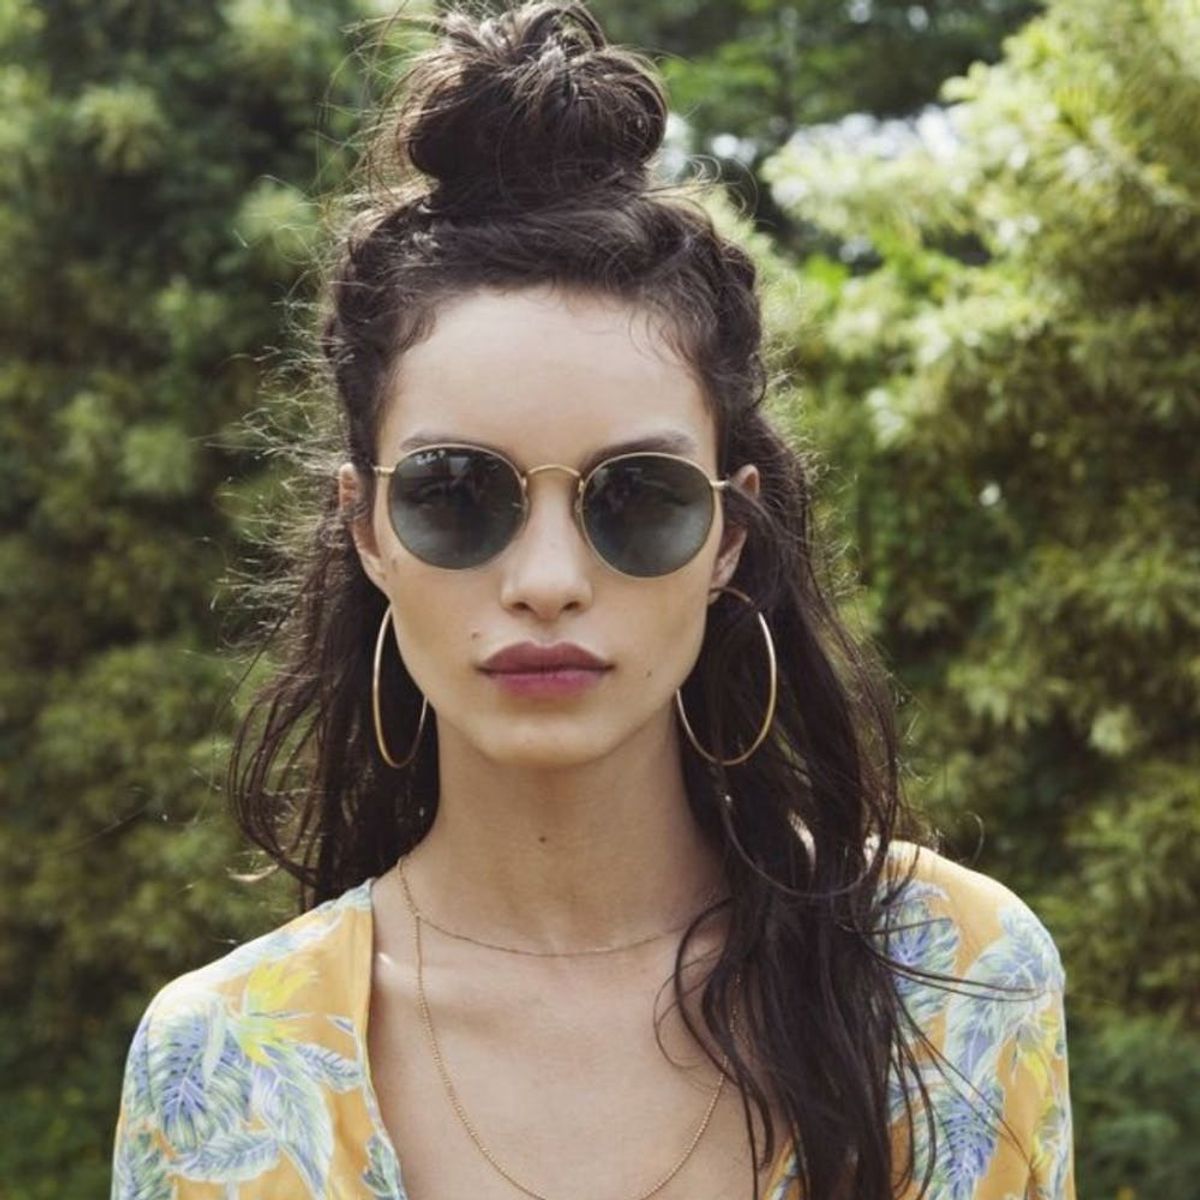 10 #LazyGirl Hairstyles for Chic Vacation Hair